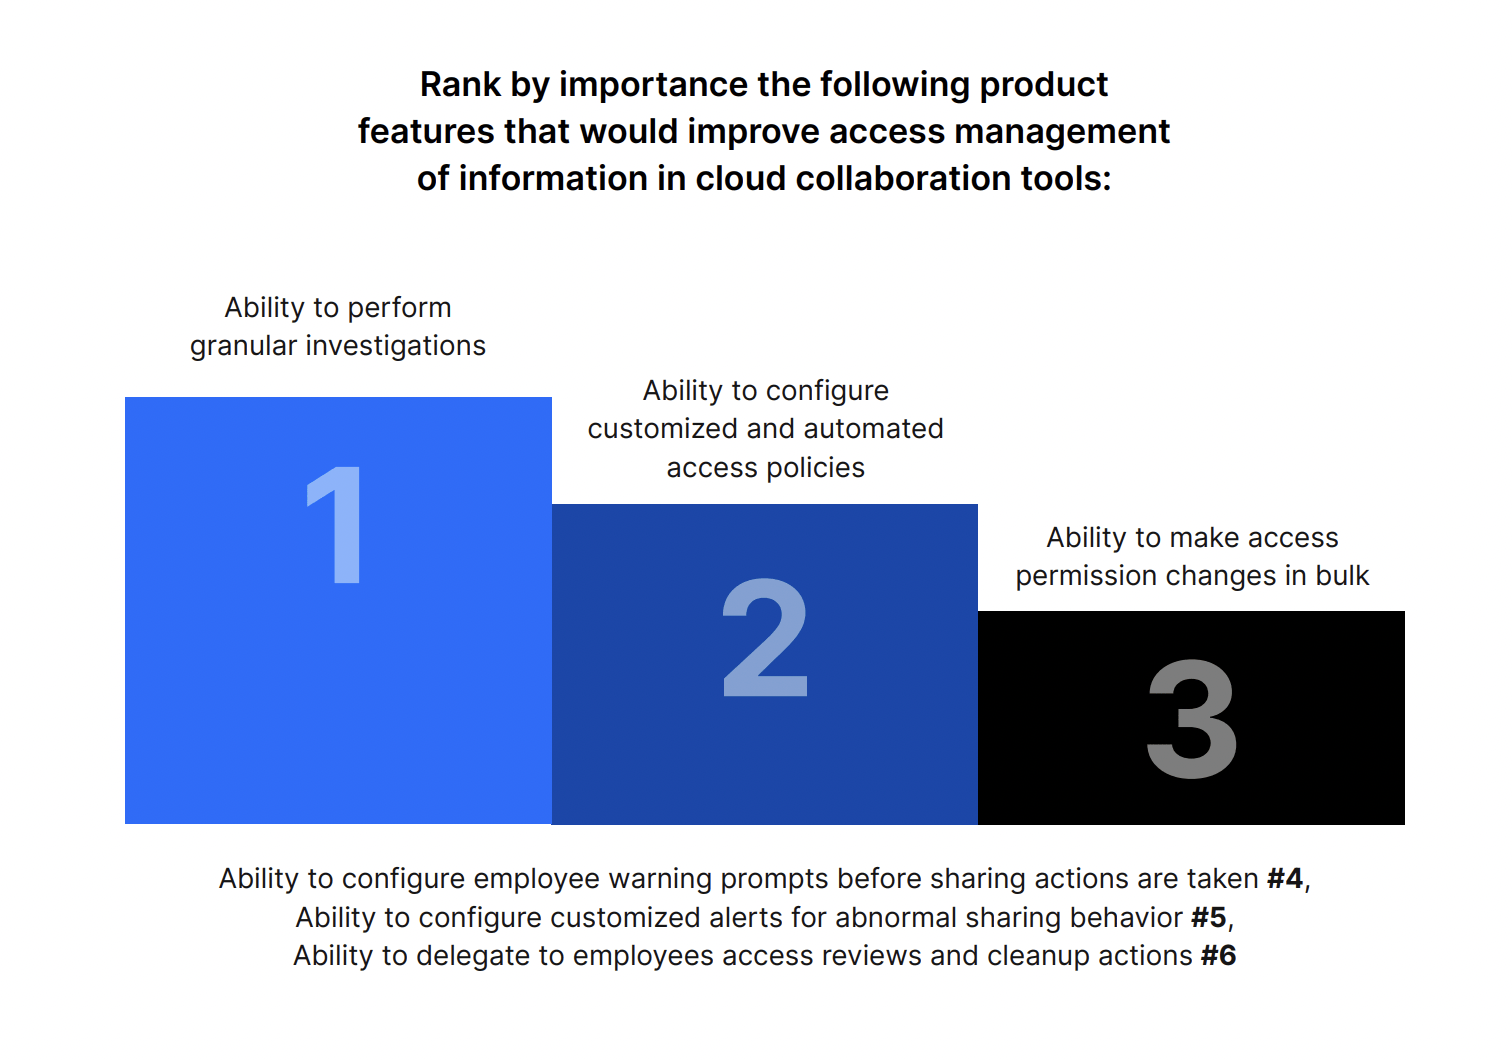 Rank by importance the following product features that would improve access management of information in cloud collaboration tools: